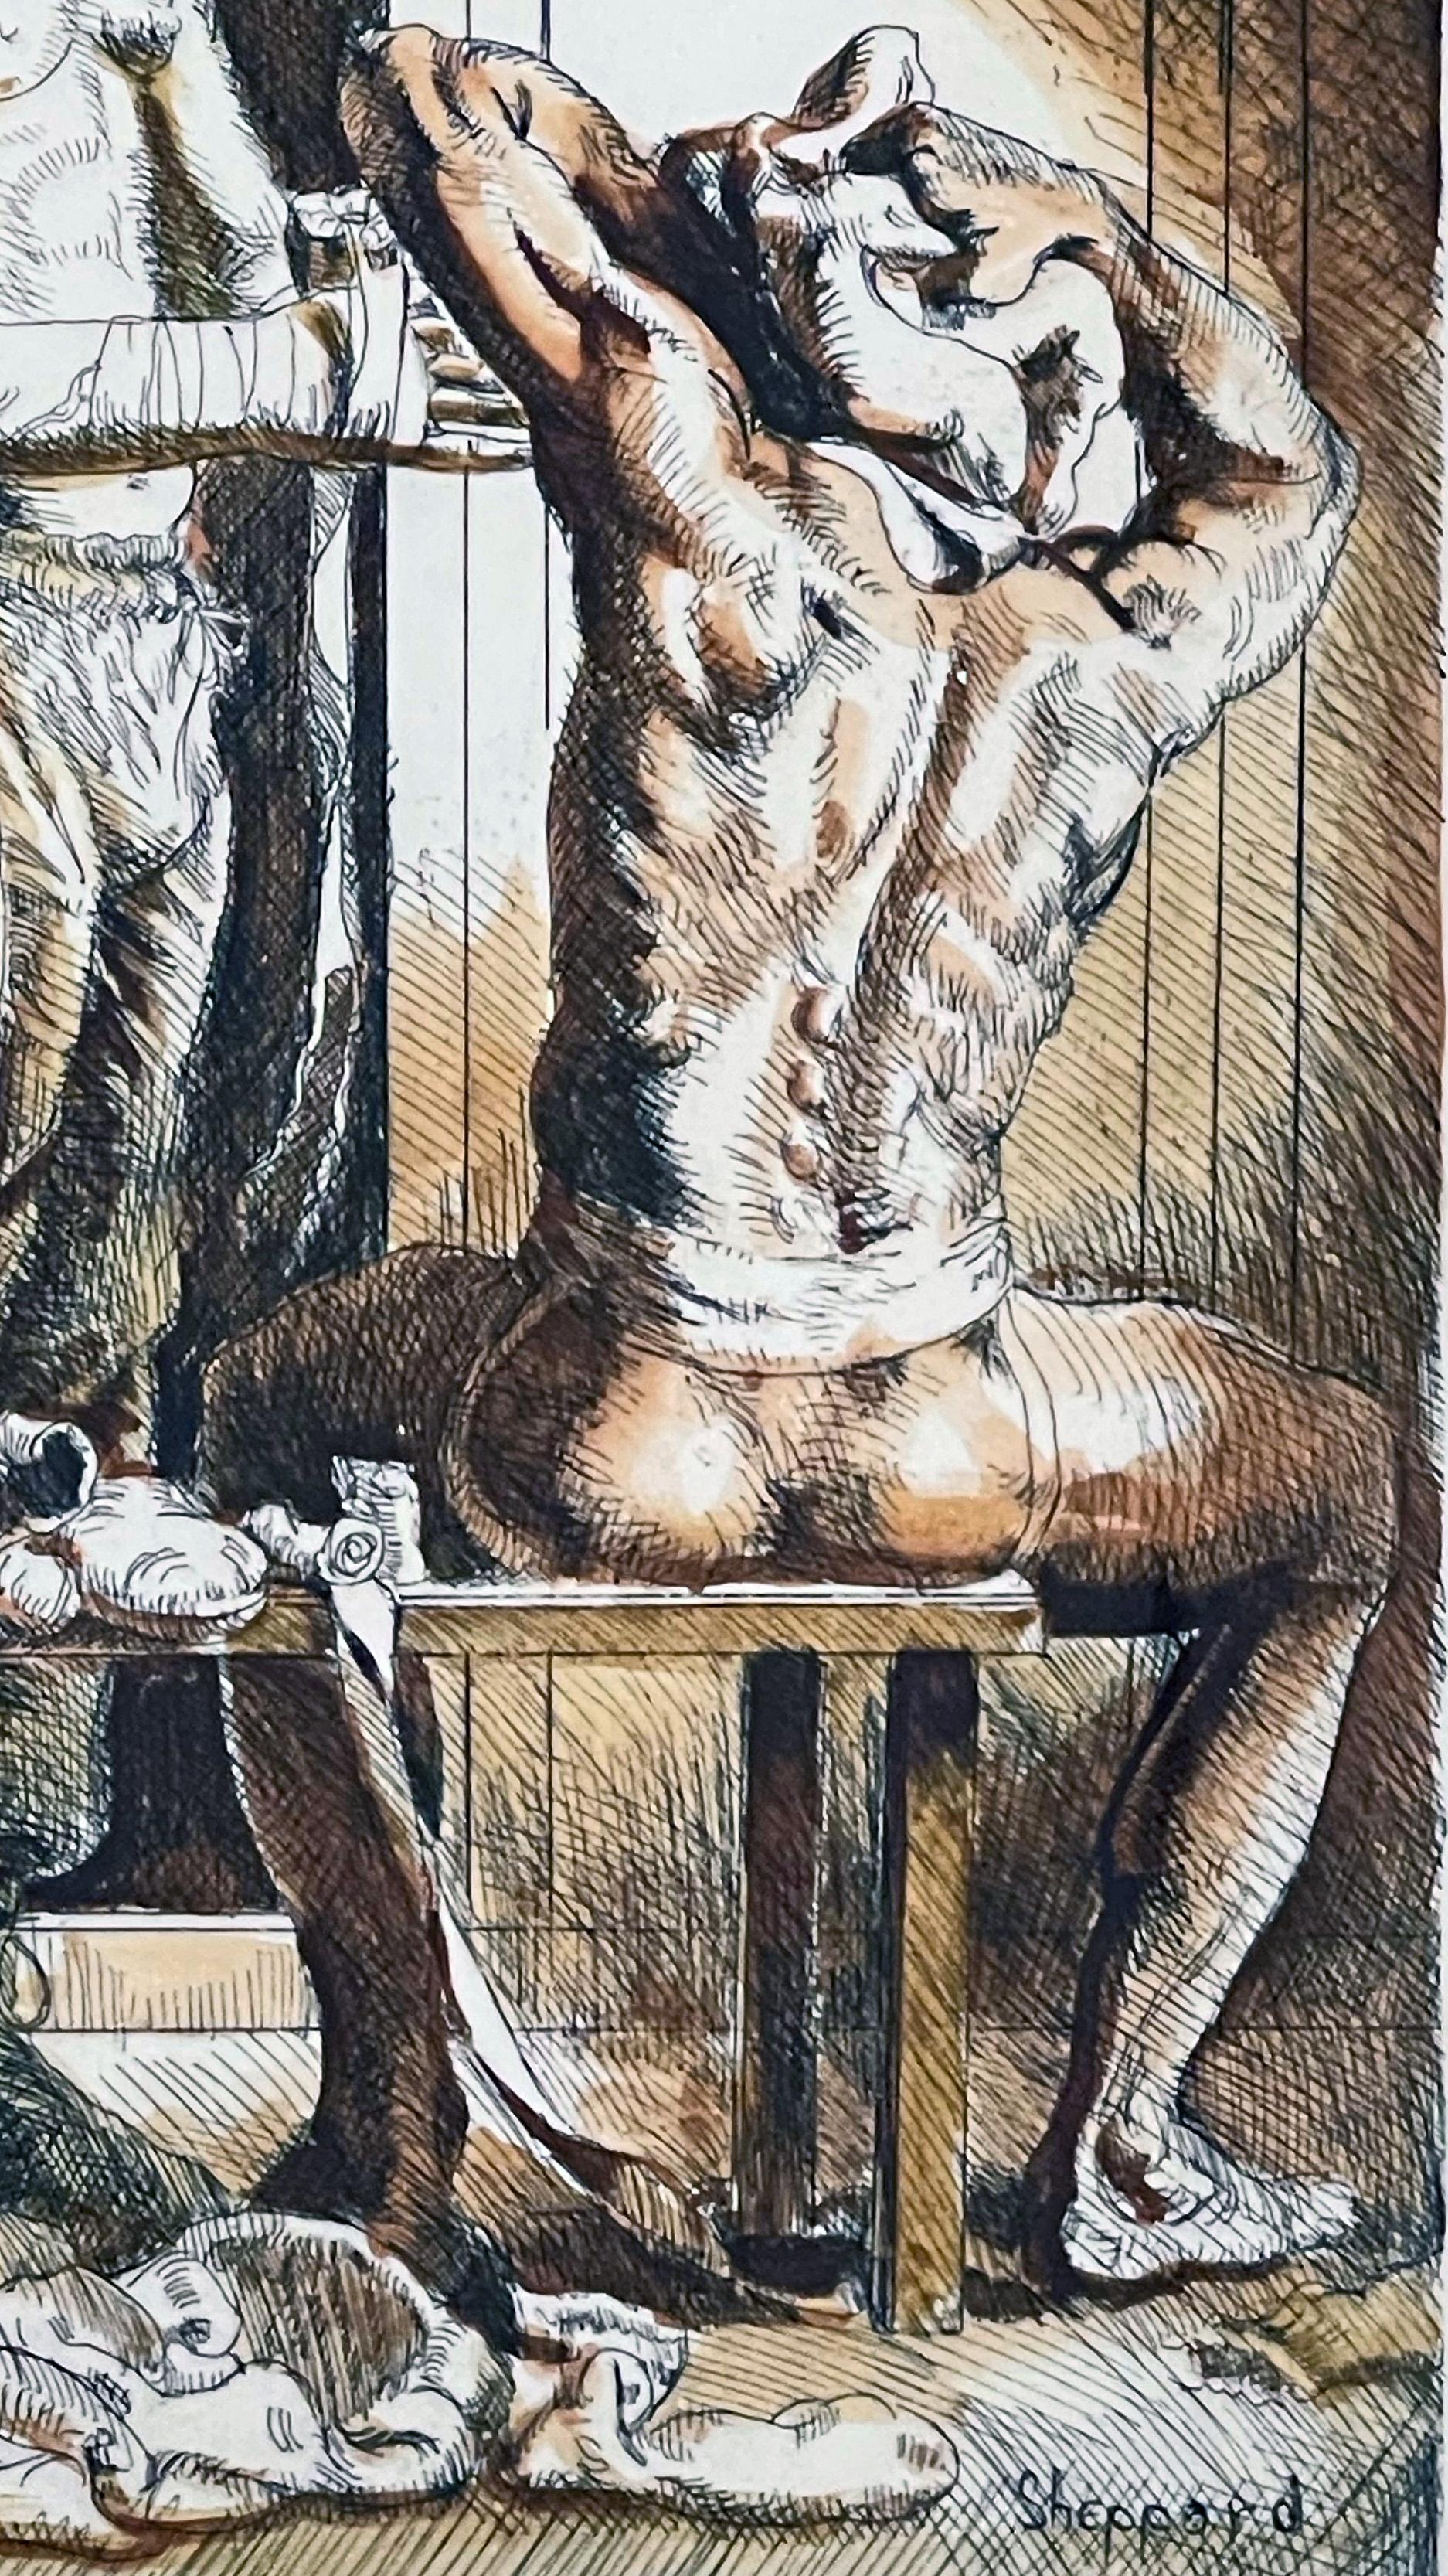 Executed and hand-watercolored by the artist, James Sheppard, this large and impressive print depicts three boxers in various stages of undress in a men's locker room, the figures highlighted in warm tones of rust and golden yellow. Sheppard was